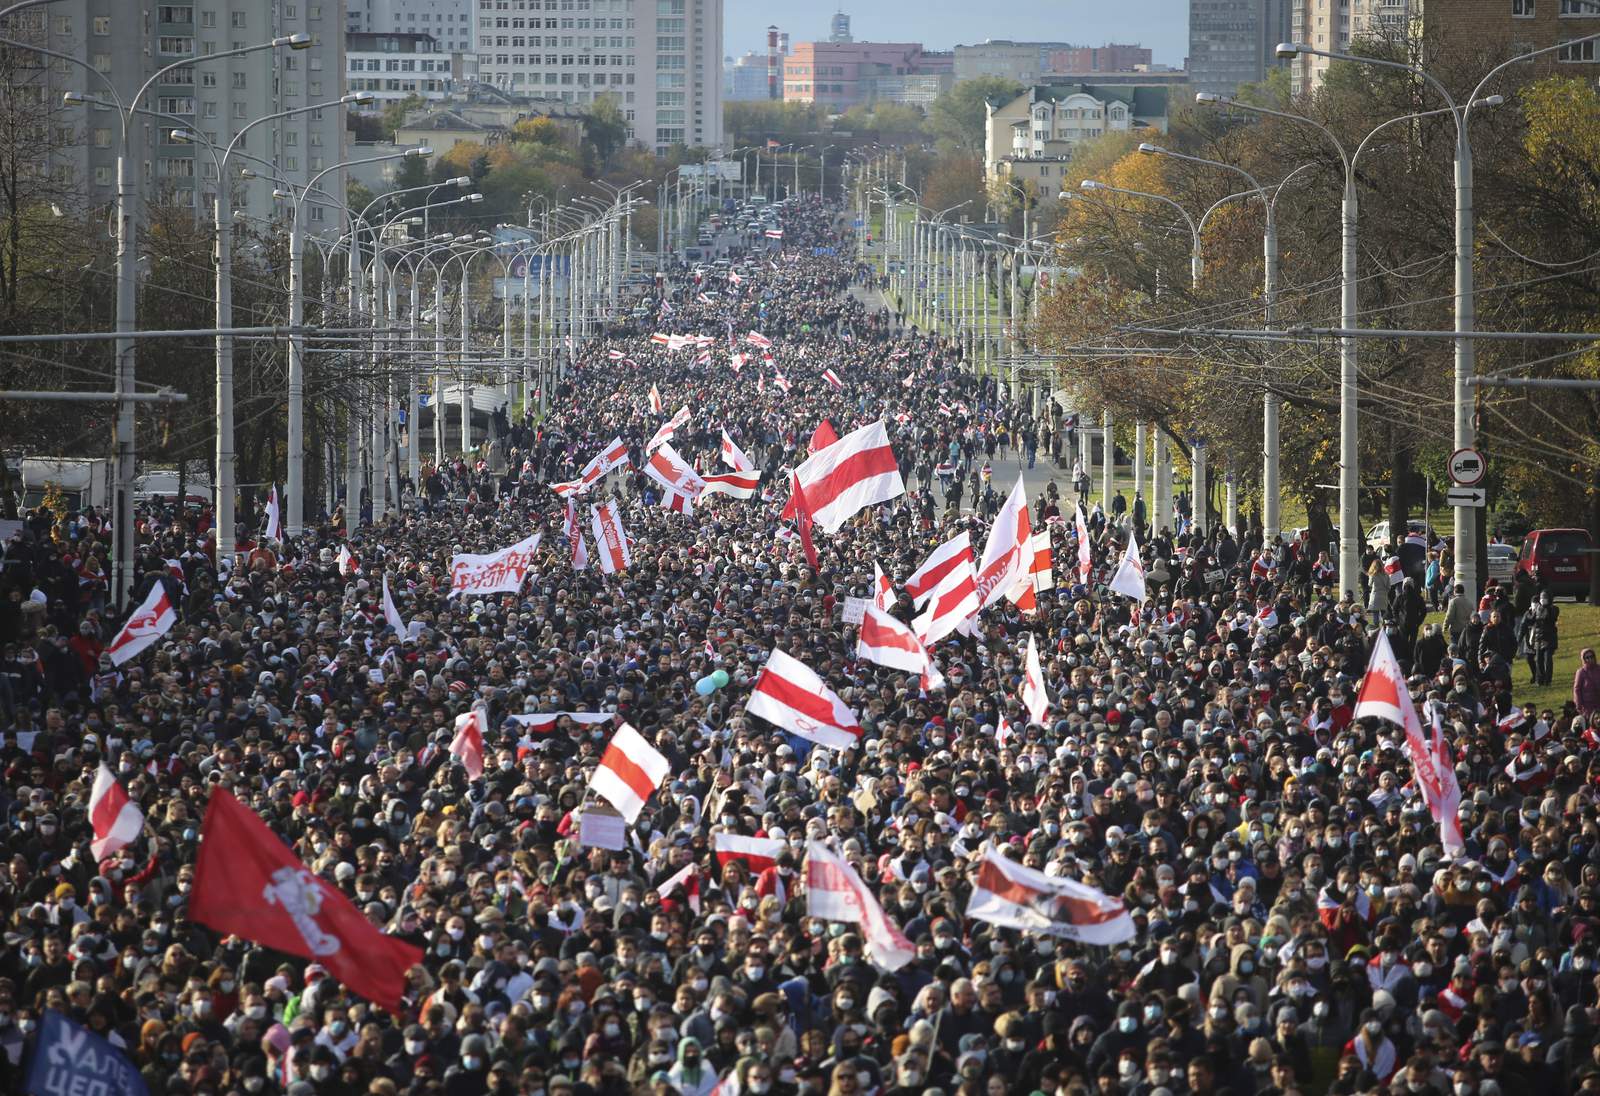 Over 50,000 march in Belarus against authoritarian leader